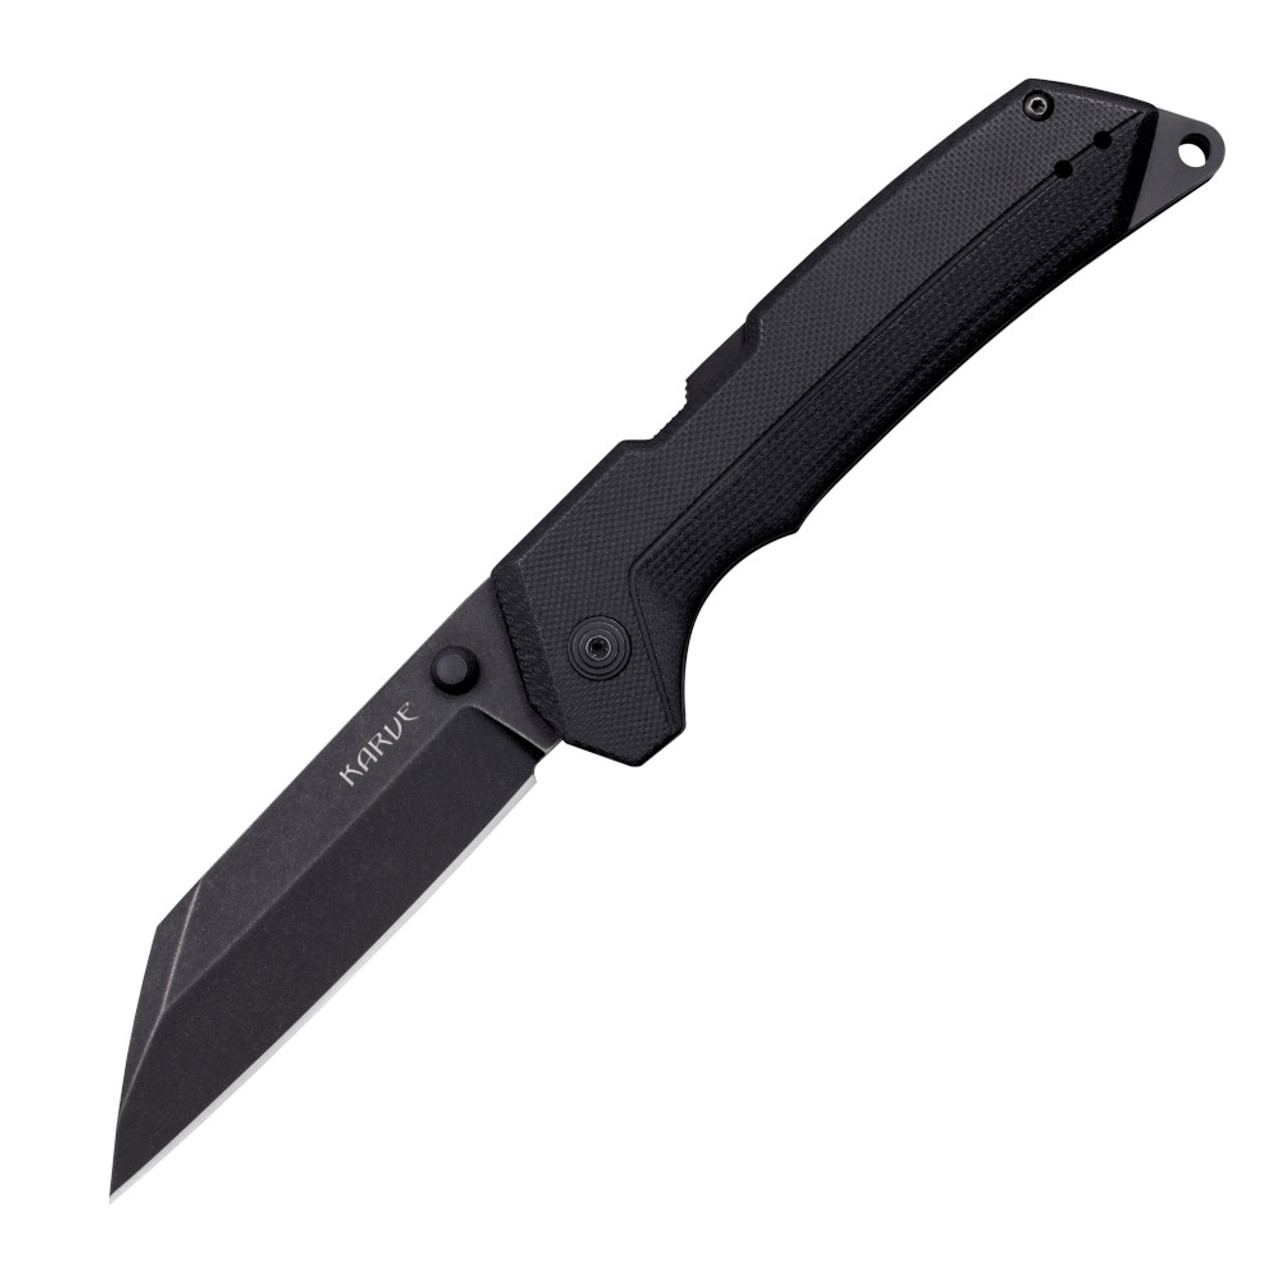 Cold Steel Knife and Tool Company